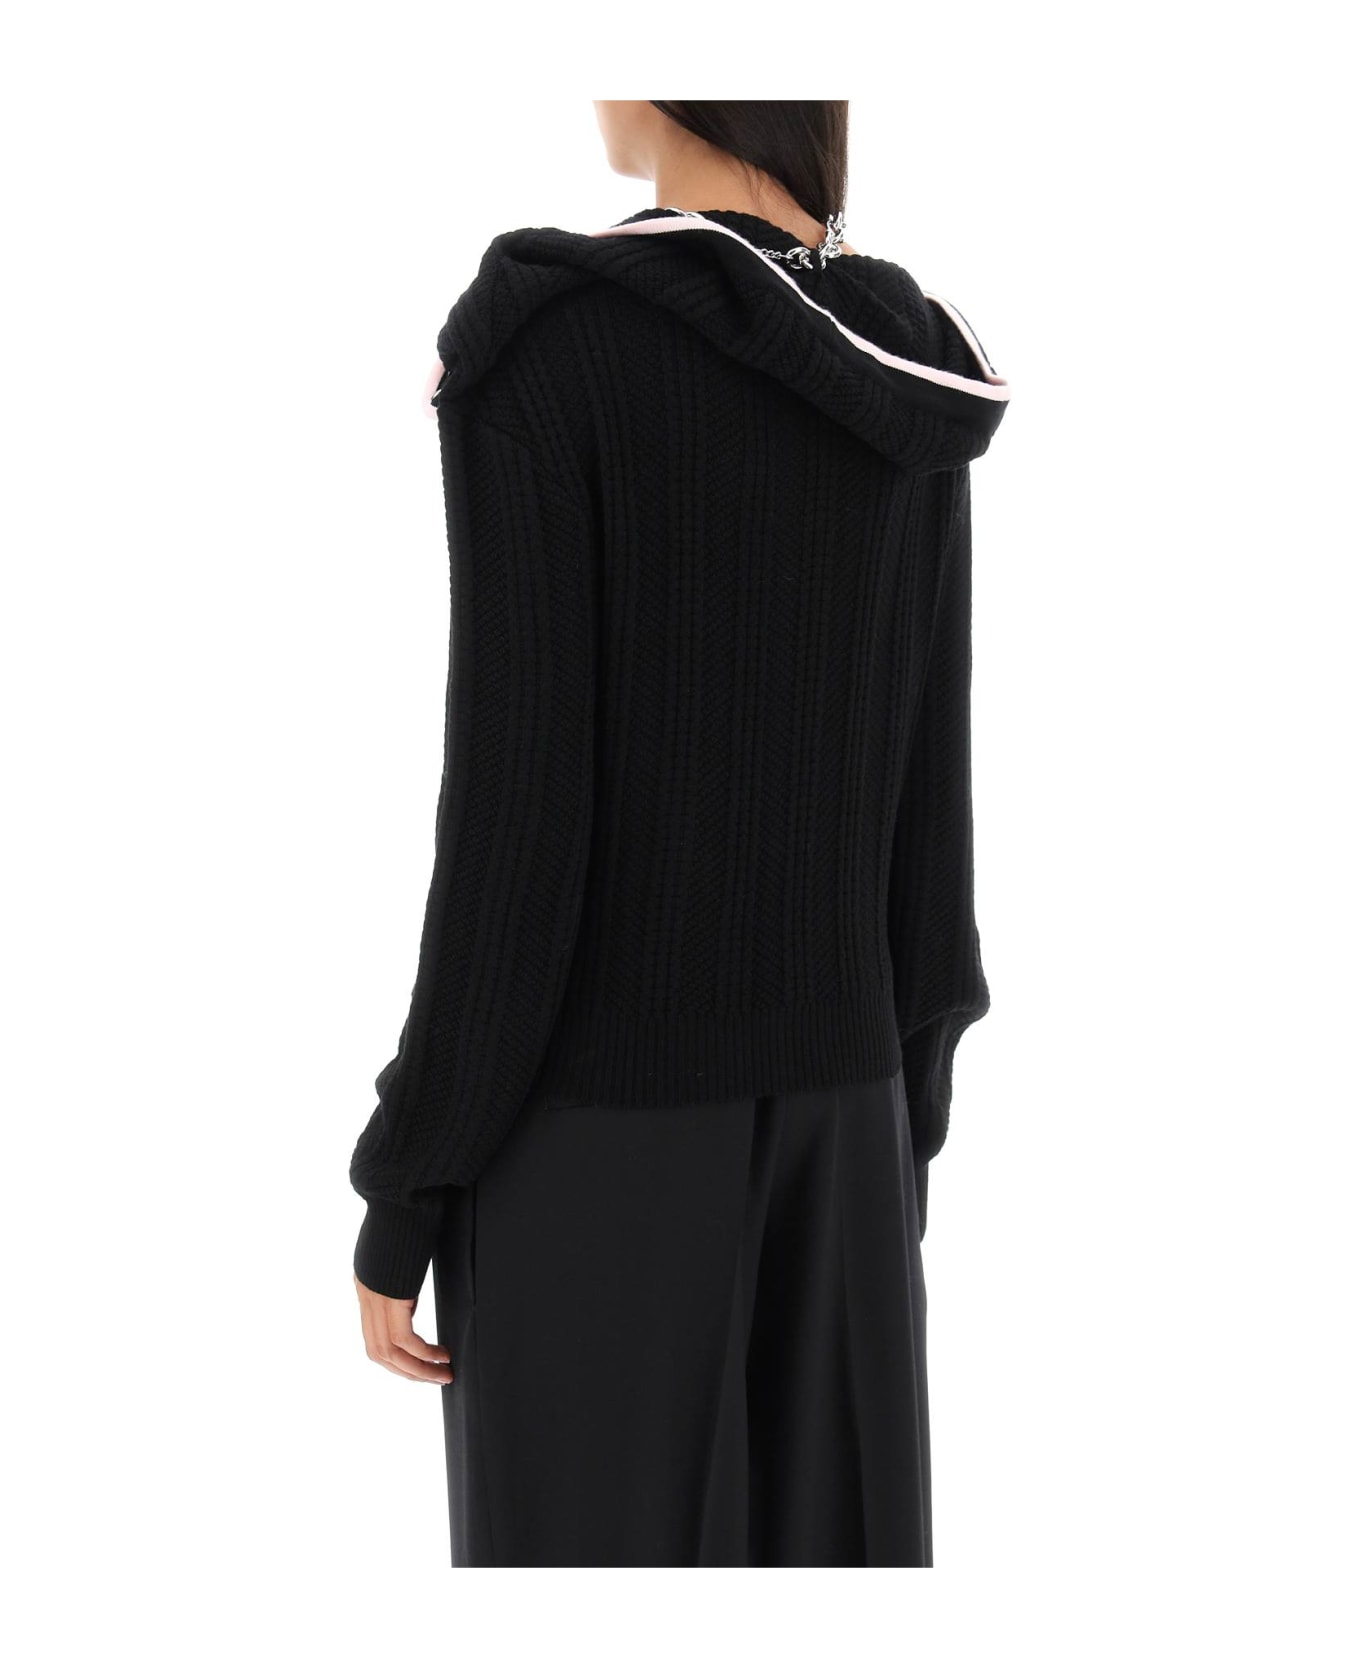 Y/Project Merino Wool Cardigan With Necklace - EVERGREEN BLACK BABY PINK (Black) カーディガン